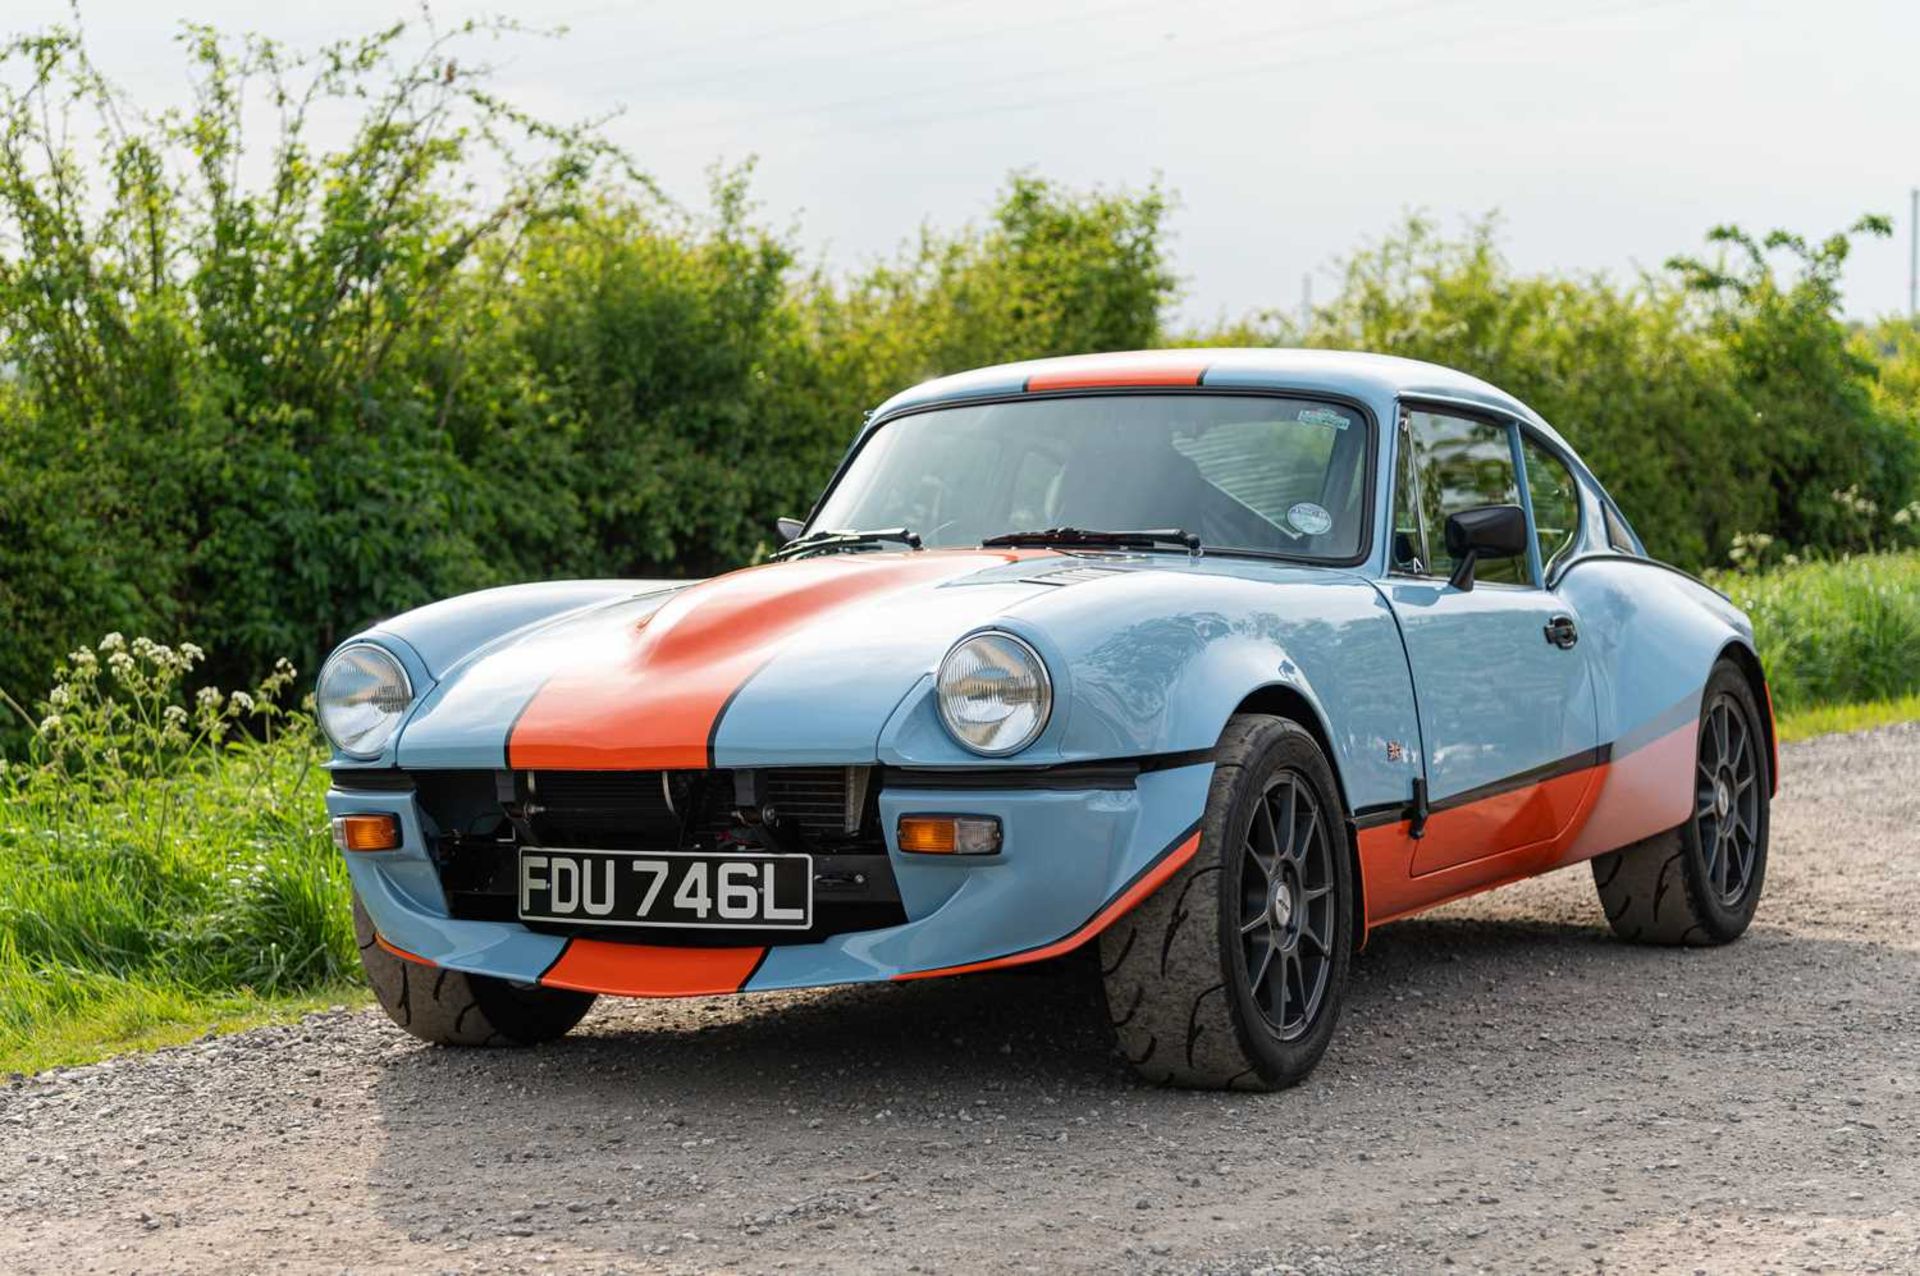 1973 Triumph GT6  ***NO RESERVE*** Presented in Gulf Racing-inspired paintwork, road-going track wea - Image 6 of 65